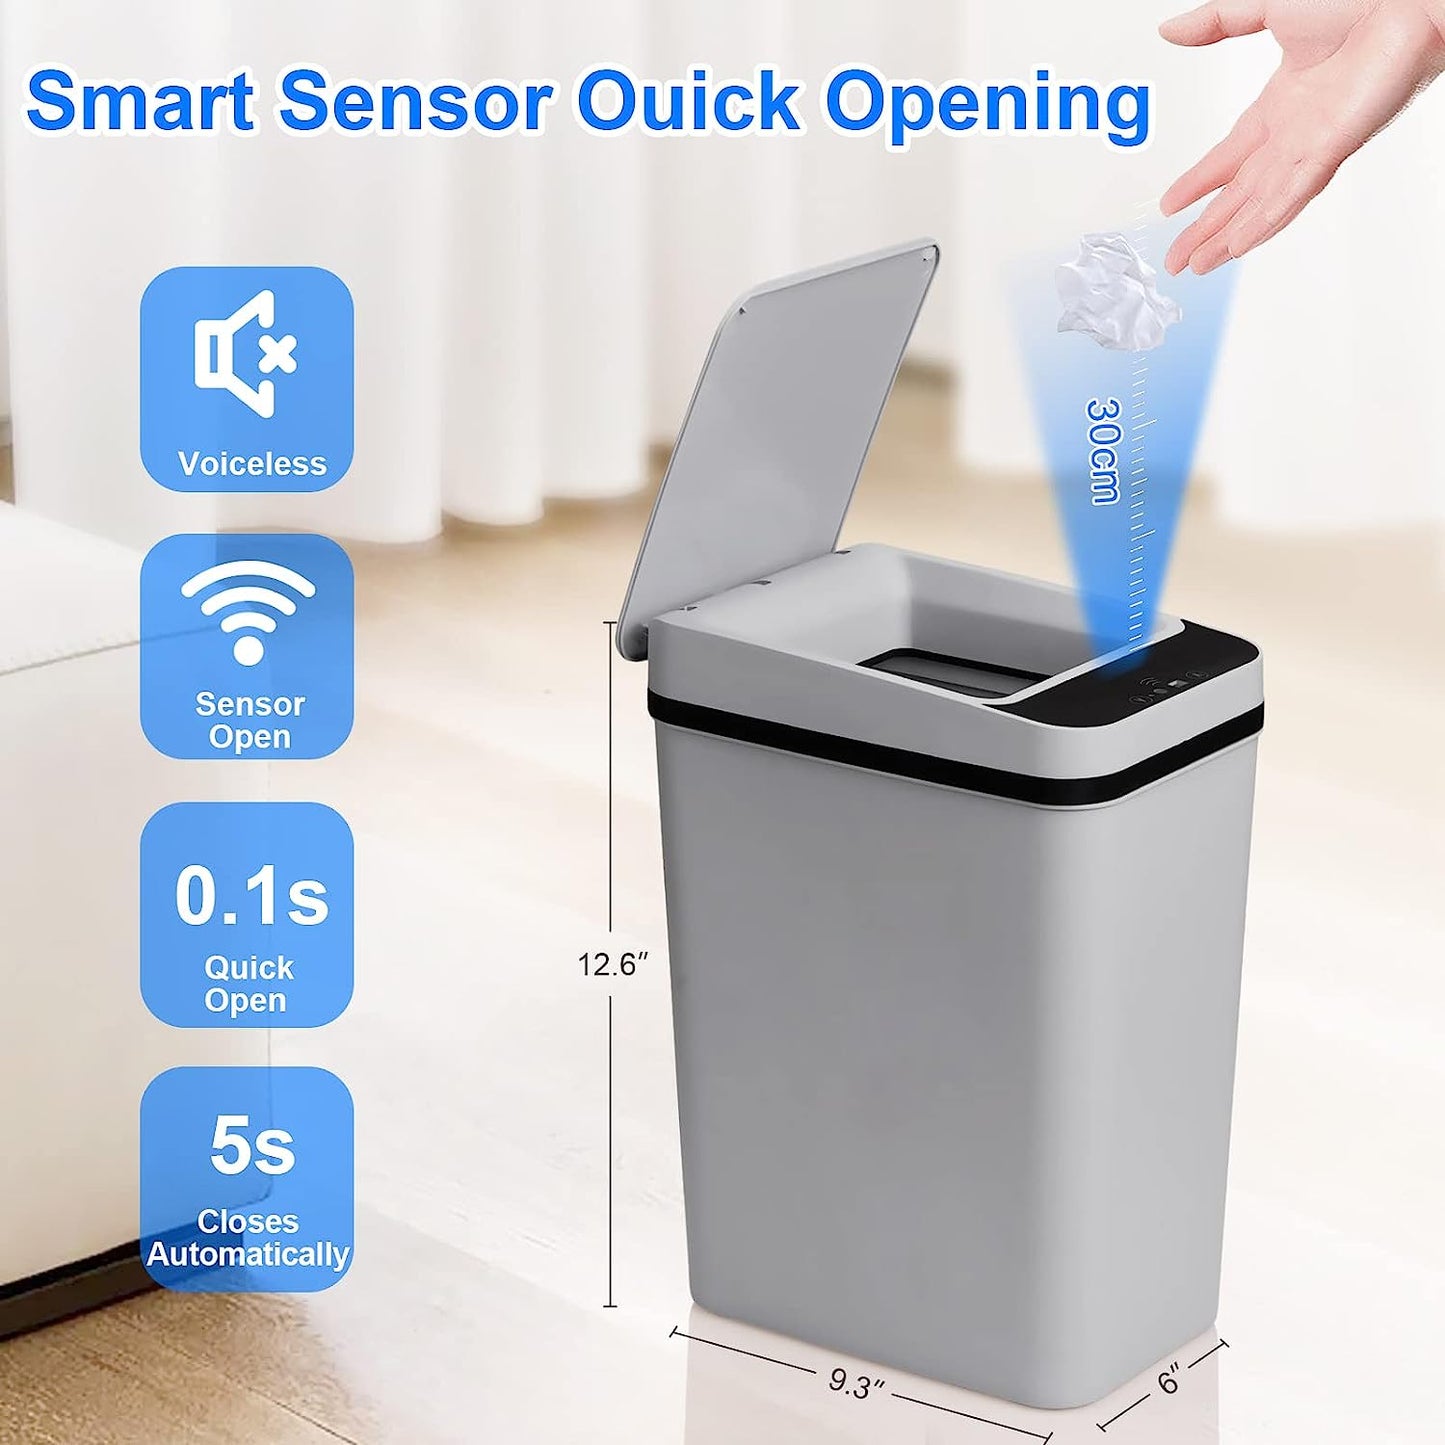 Smart Touchless Trash Can